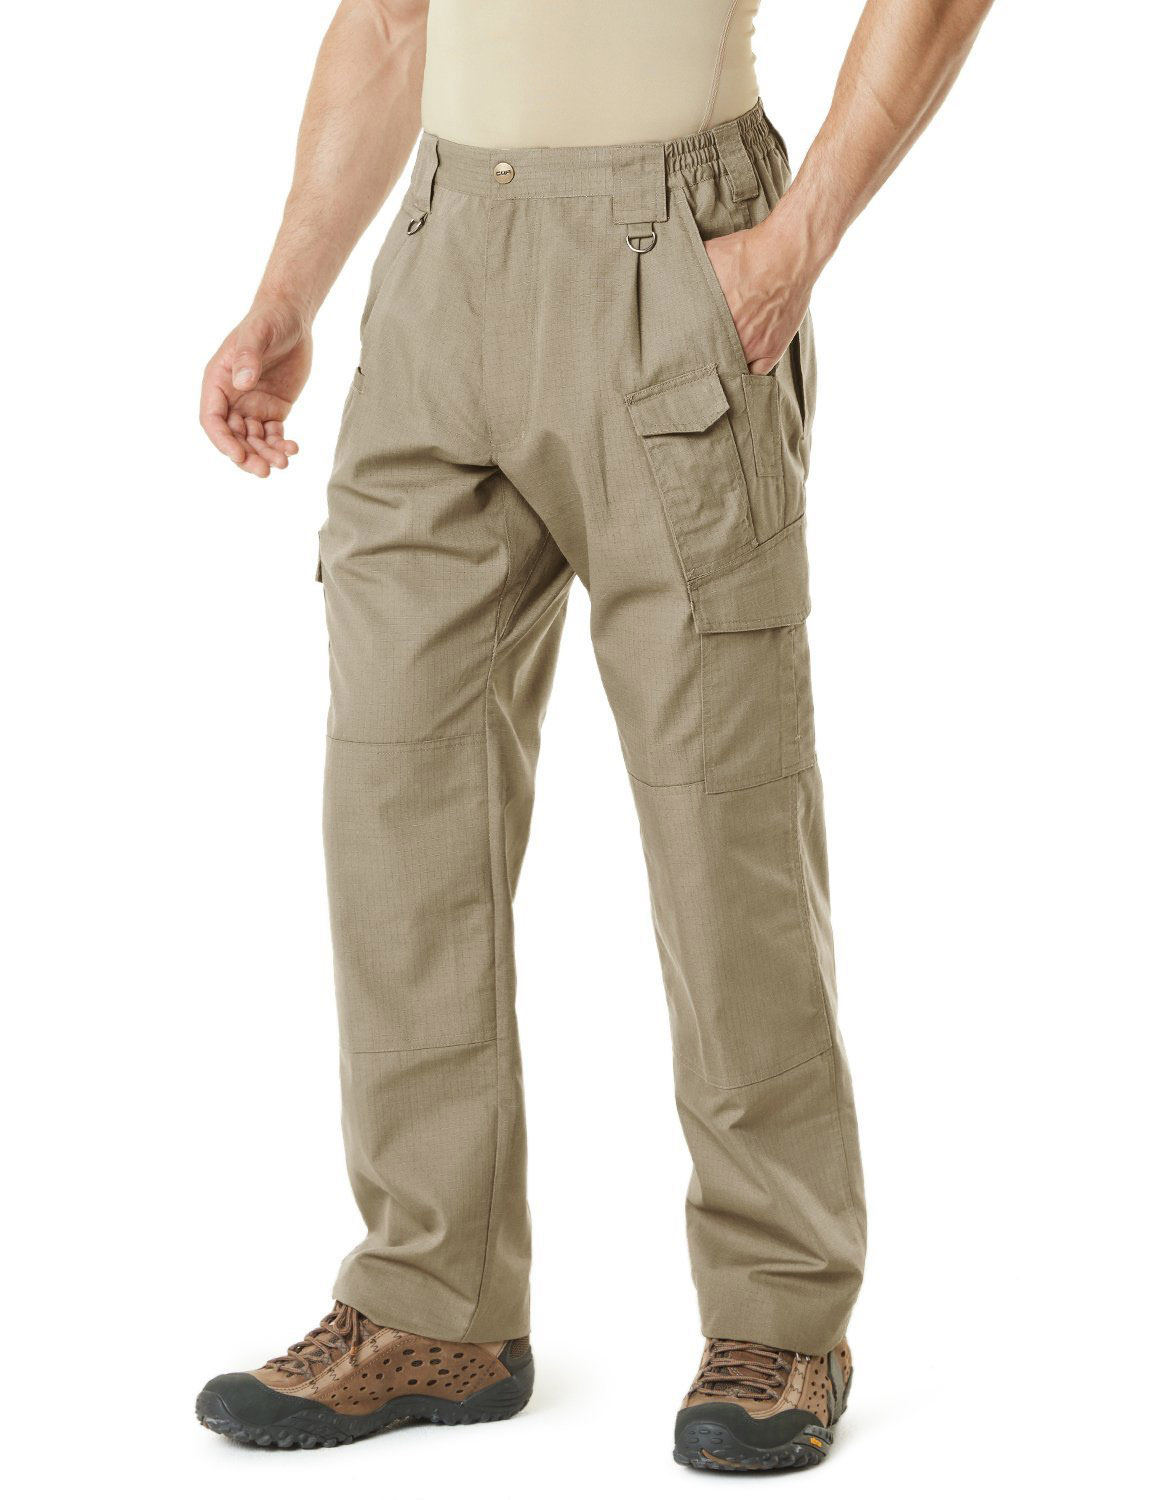 best work trousers for hot weather